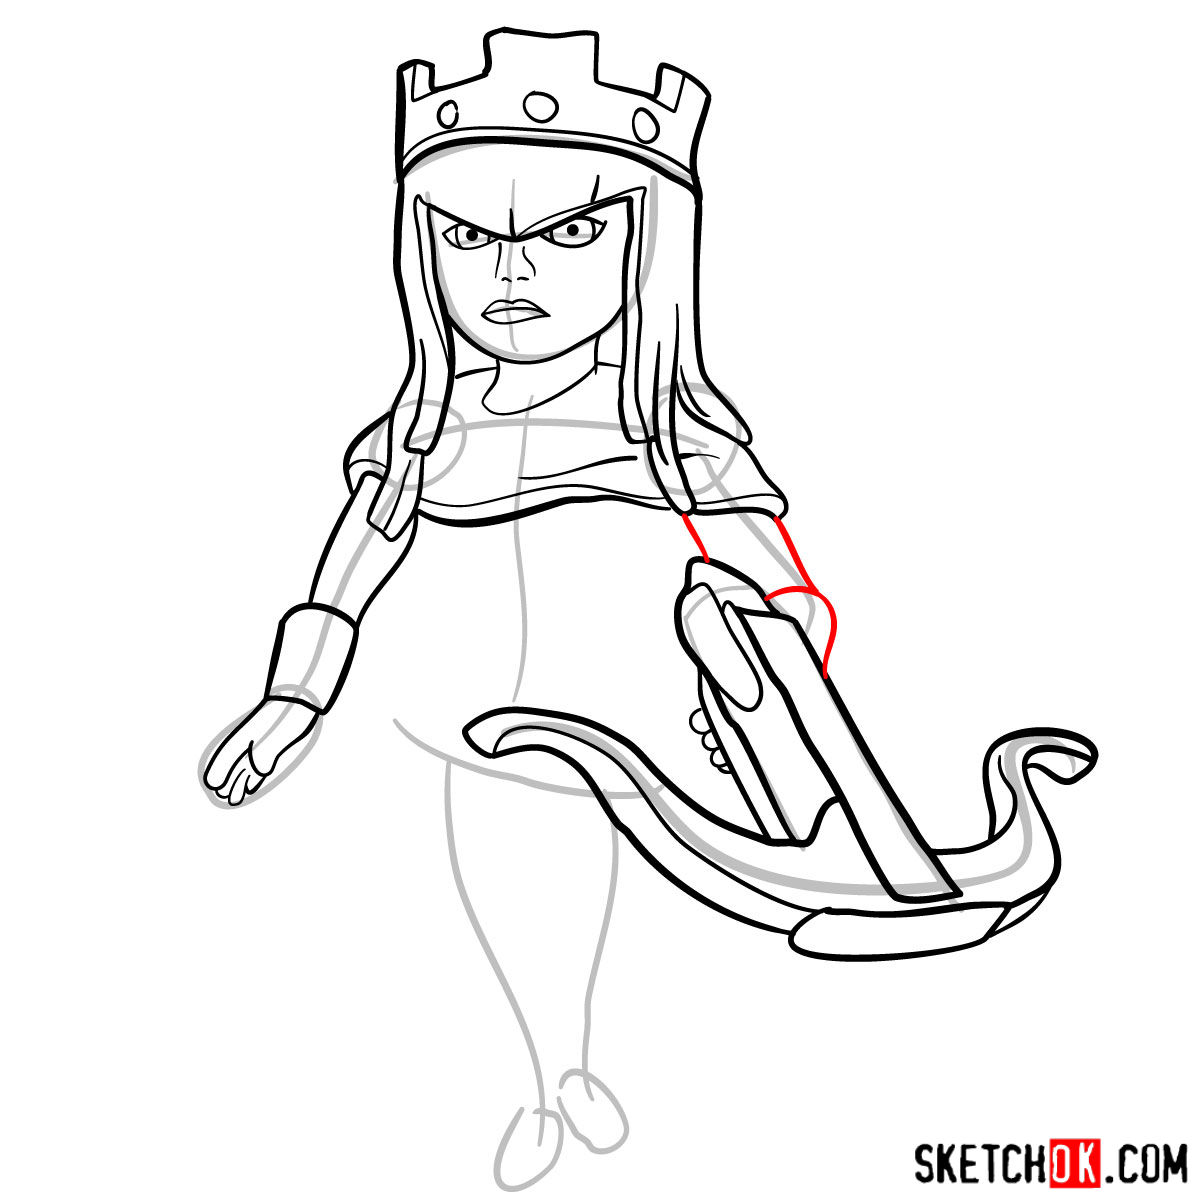 How to draw Archer Queen from Clash of Clans game - step 09